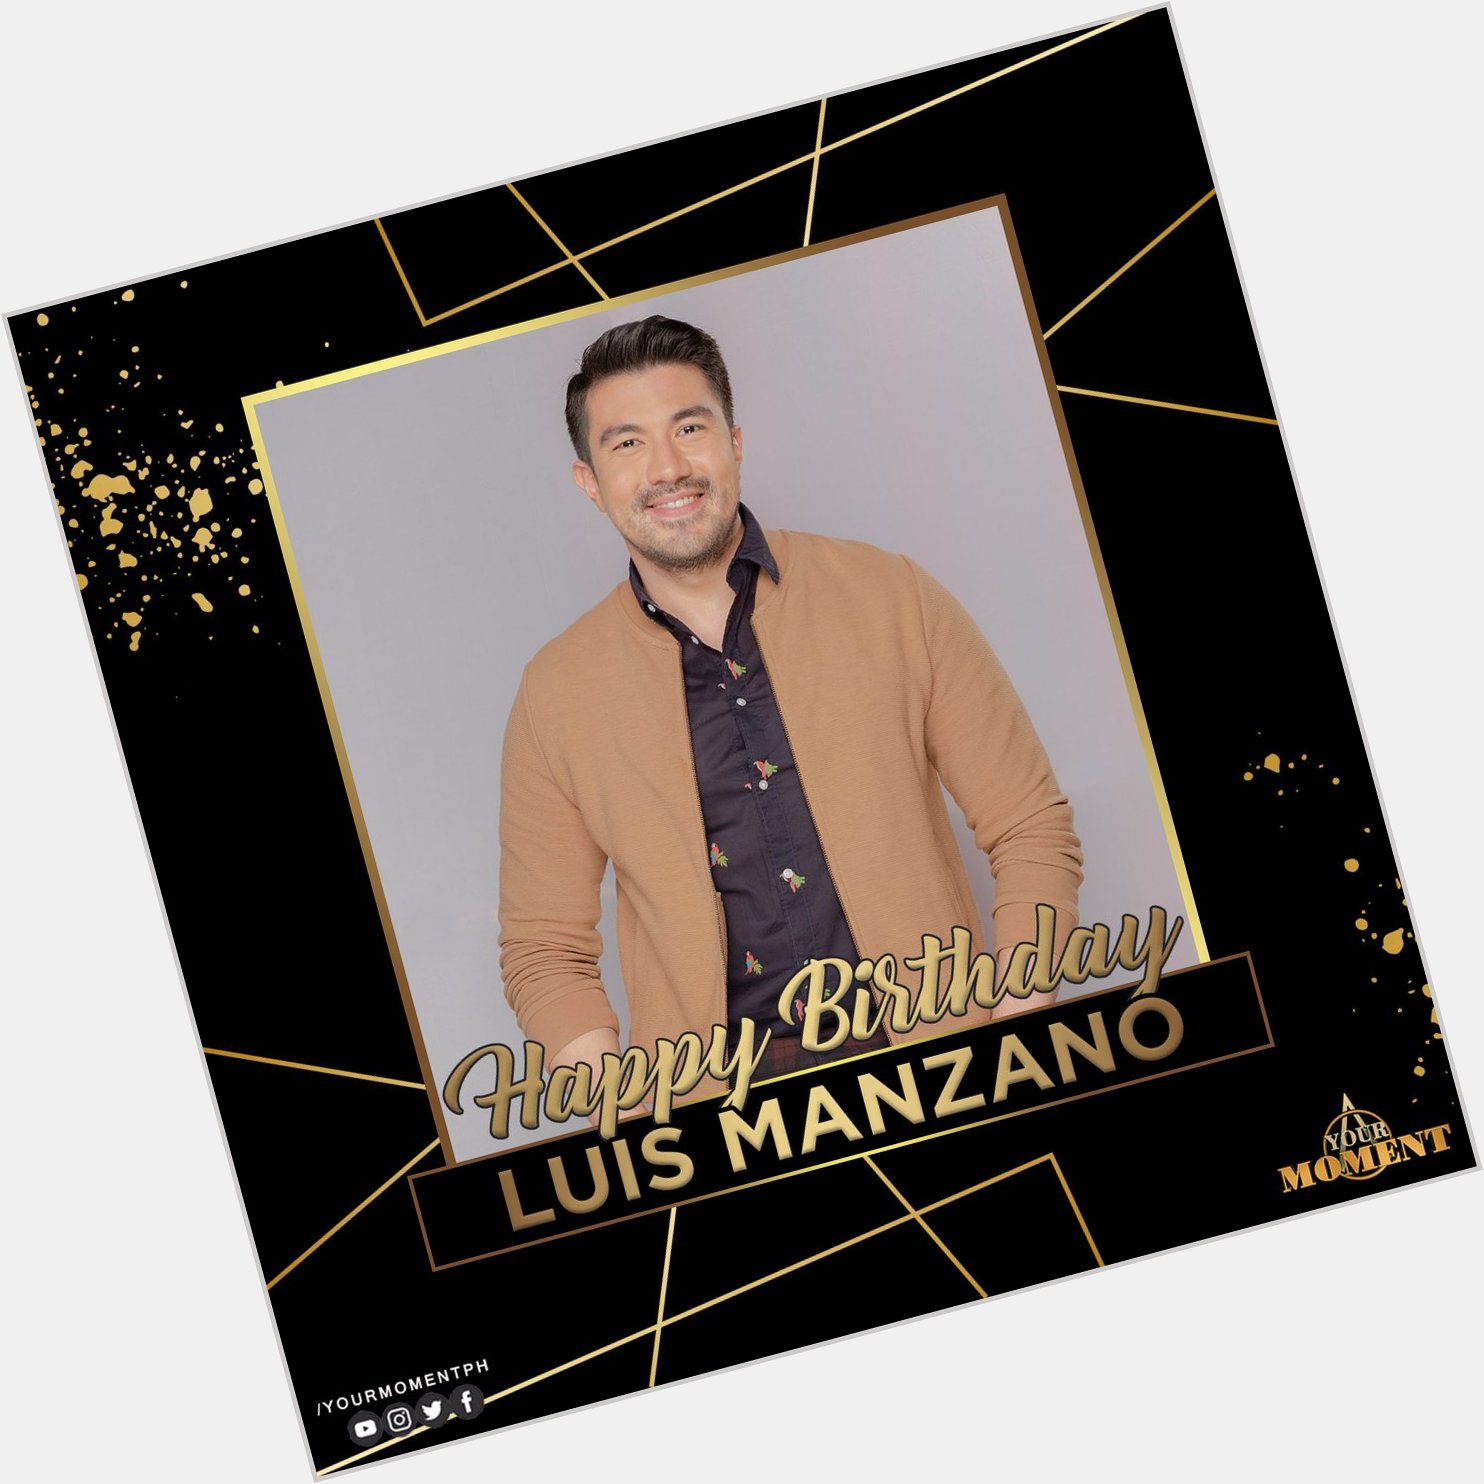 Happy birthday to one of our hosts Luis Manzano! Wishing you an amazing day full of special moments. 